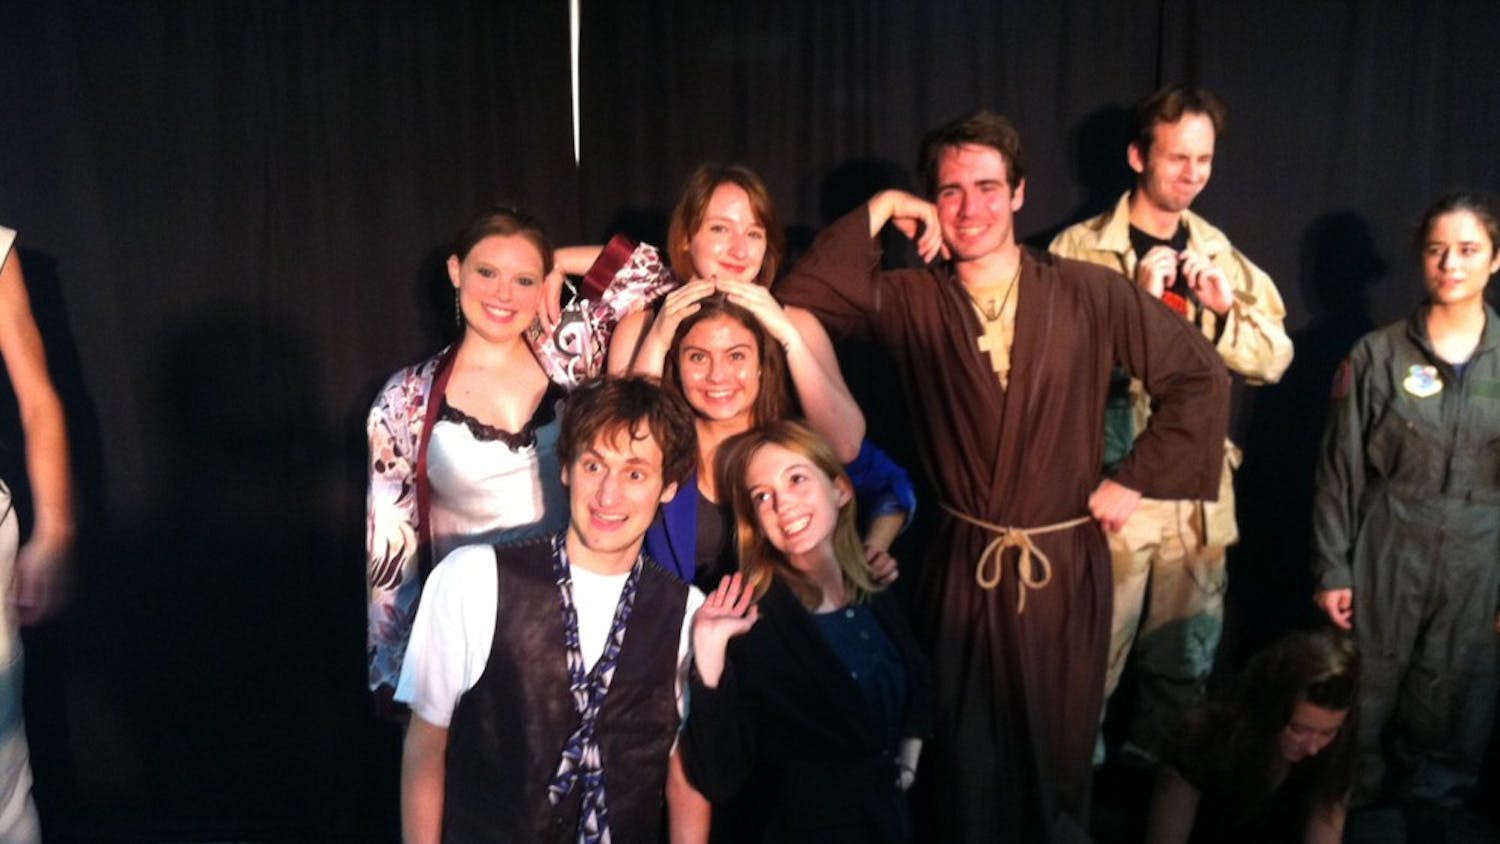 	The cast for the &#8220;Measure for Measure&#8221; scene poses for a photo during their dress rehearsal. 